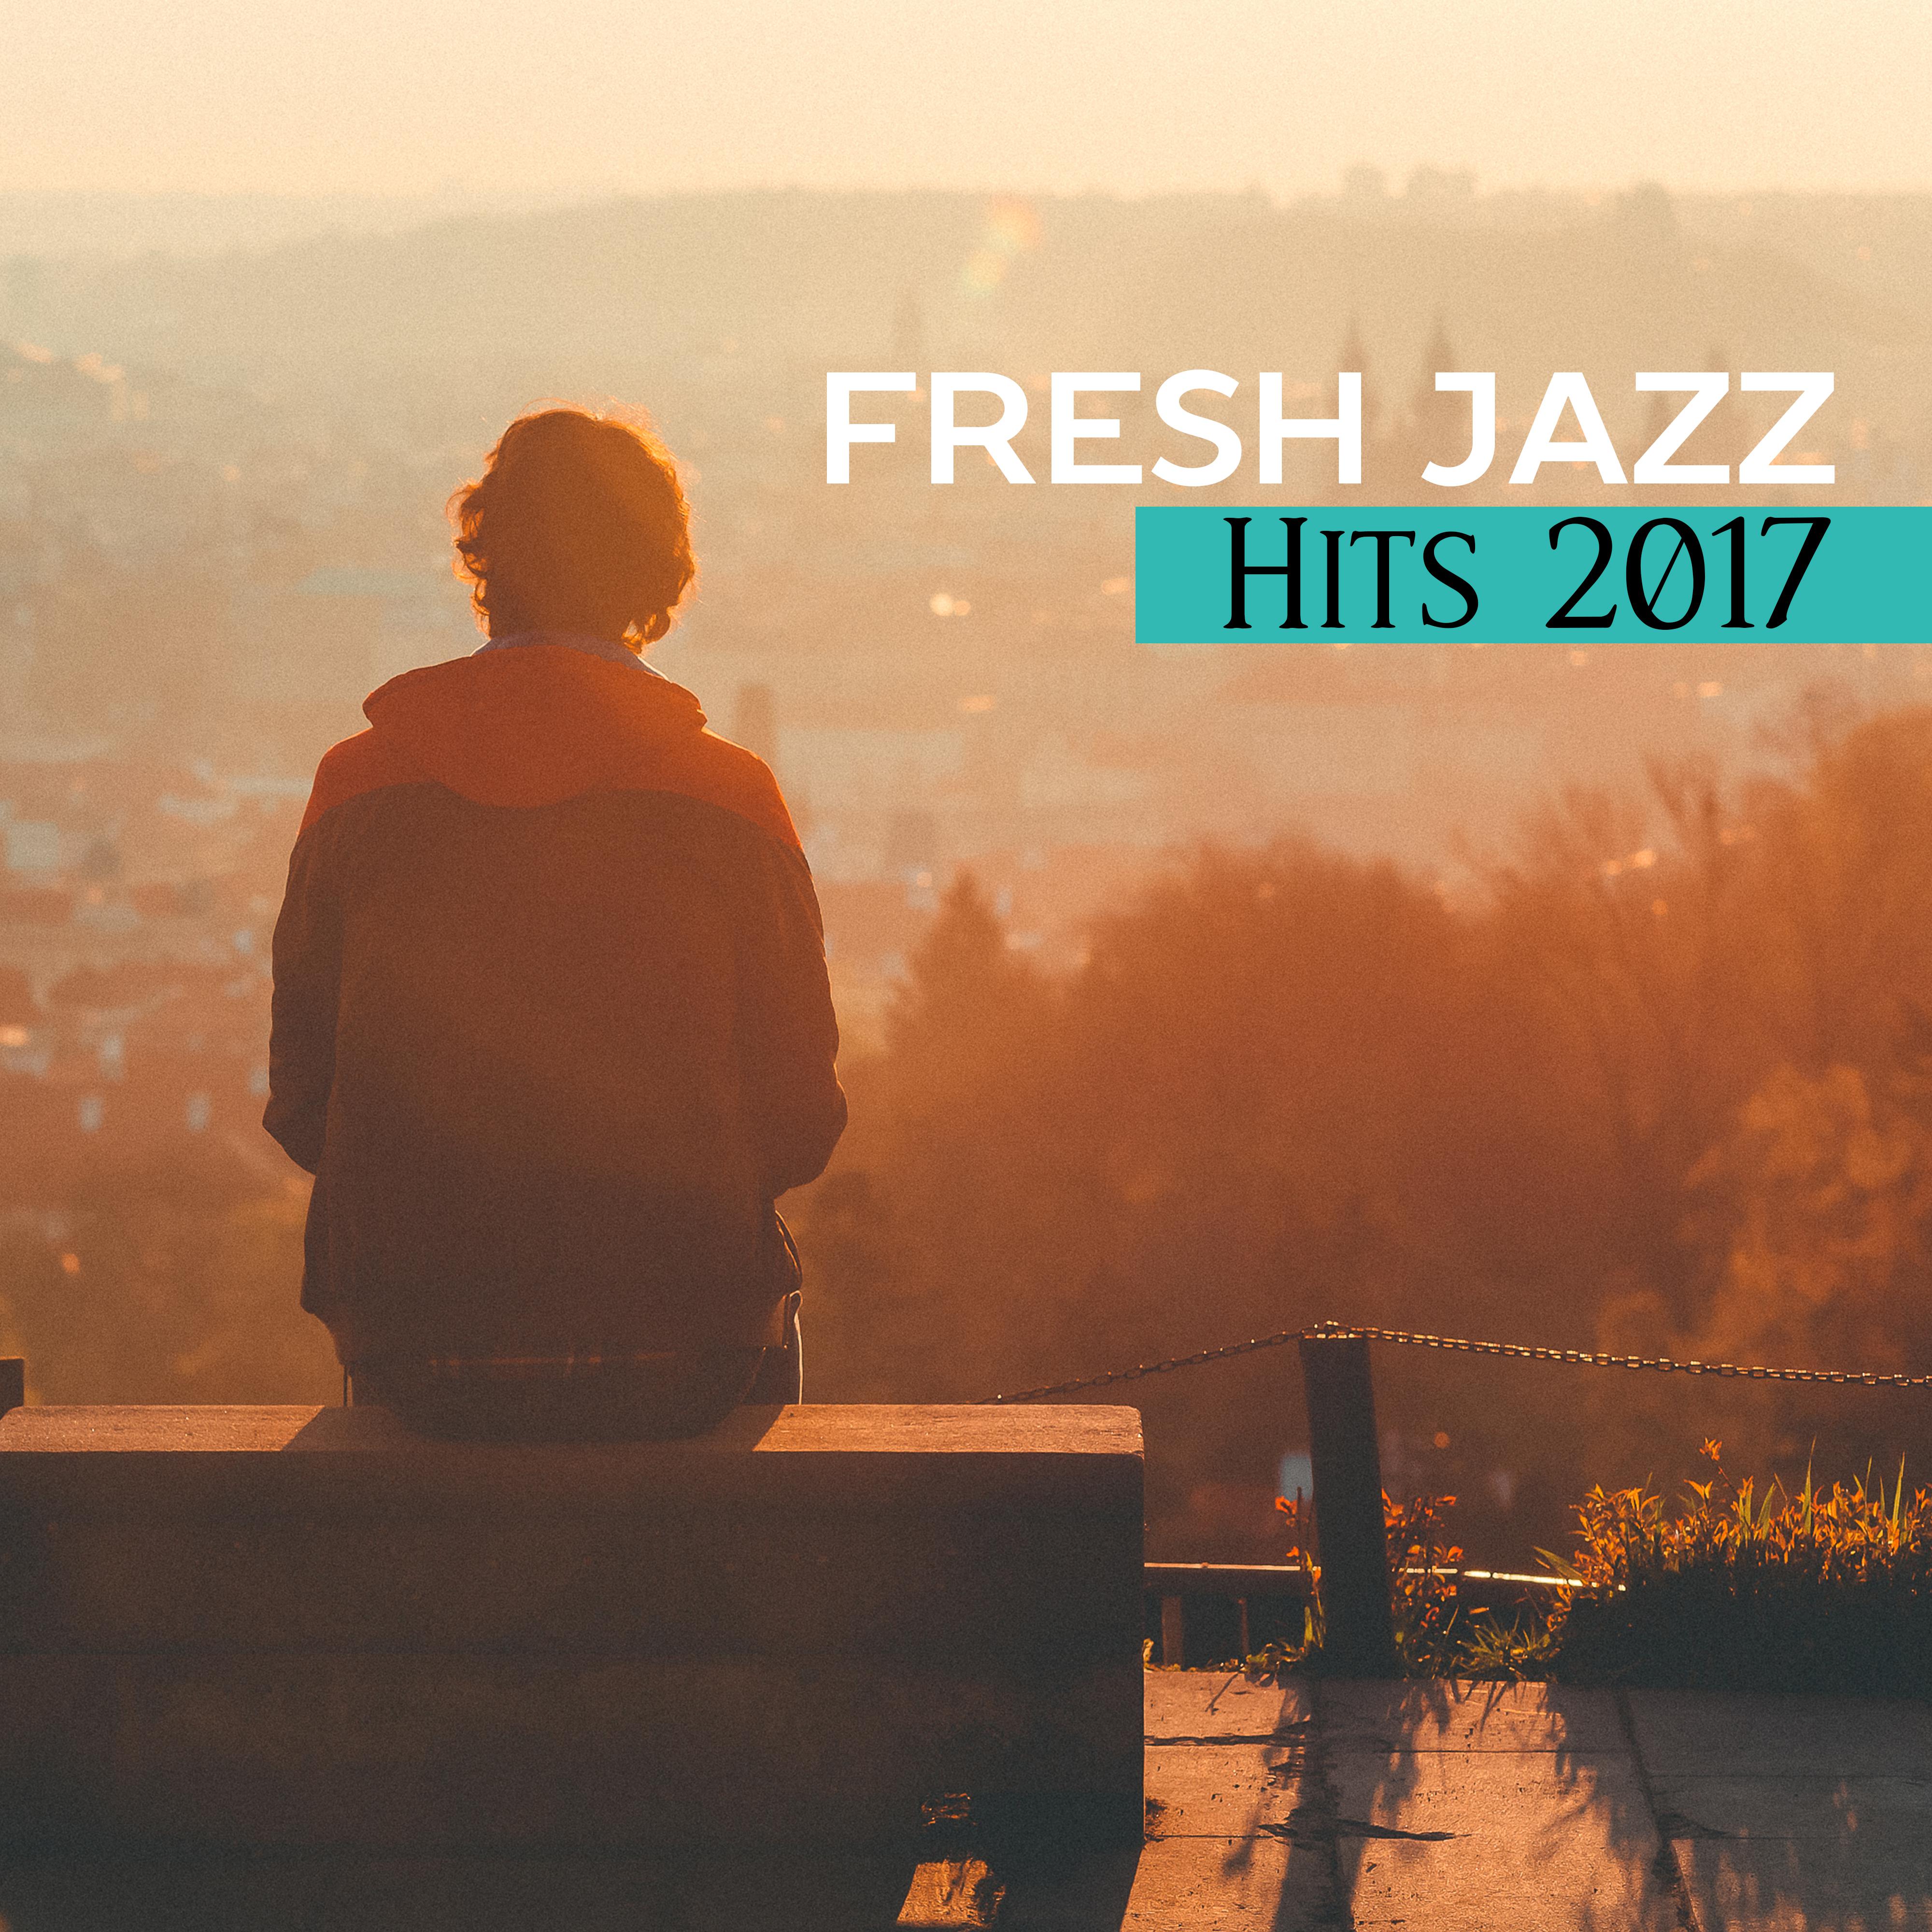 Fresh Jazz Hits 2017  Relaxing Jazz, Instrumental Music, The Best Selected Jazz Songs